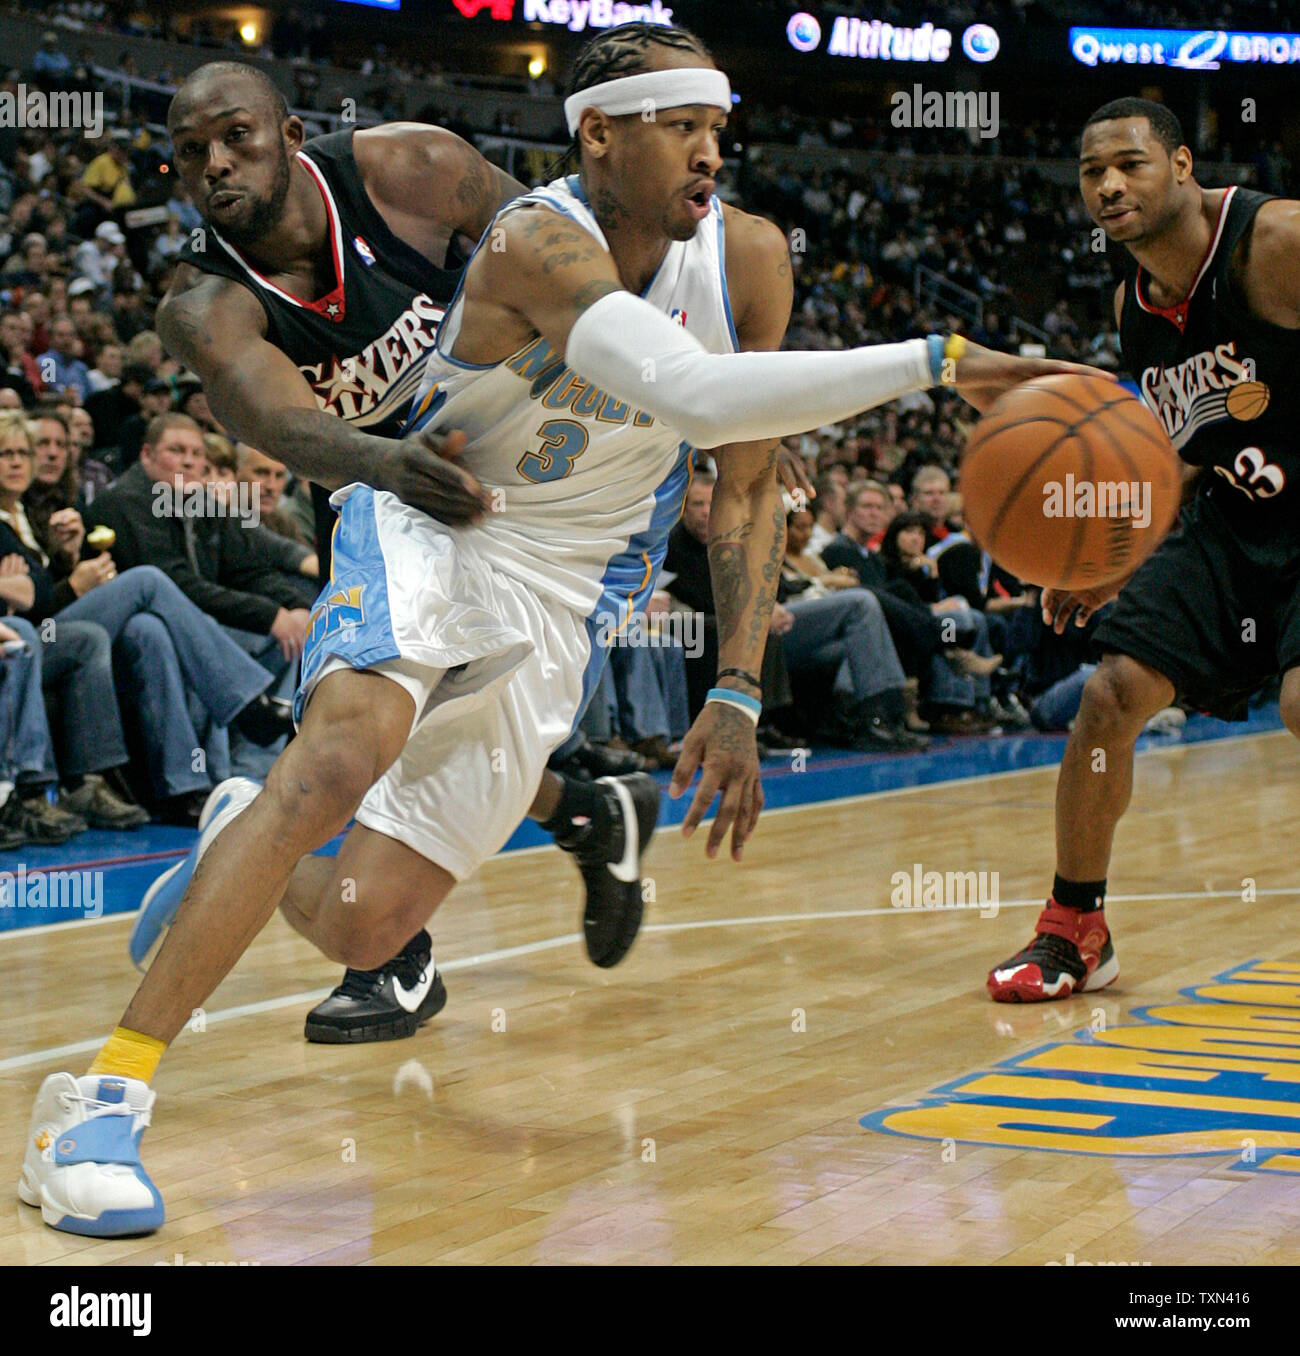 Denver Nuggets guard Allen Iverson (C) drives past Philadelphia 76ers guard  Willie Green (33) and forward Andre Iguodala during the first quarter at  the Pepsi Center in Denver on January 6, 2008. (